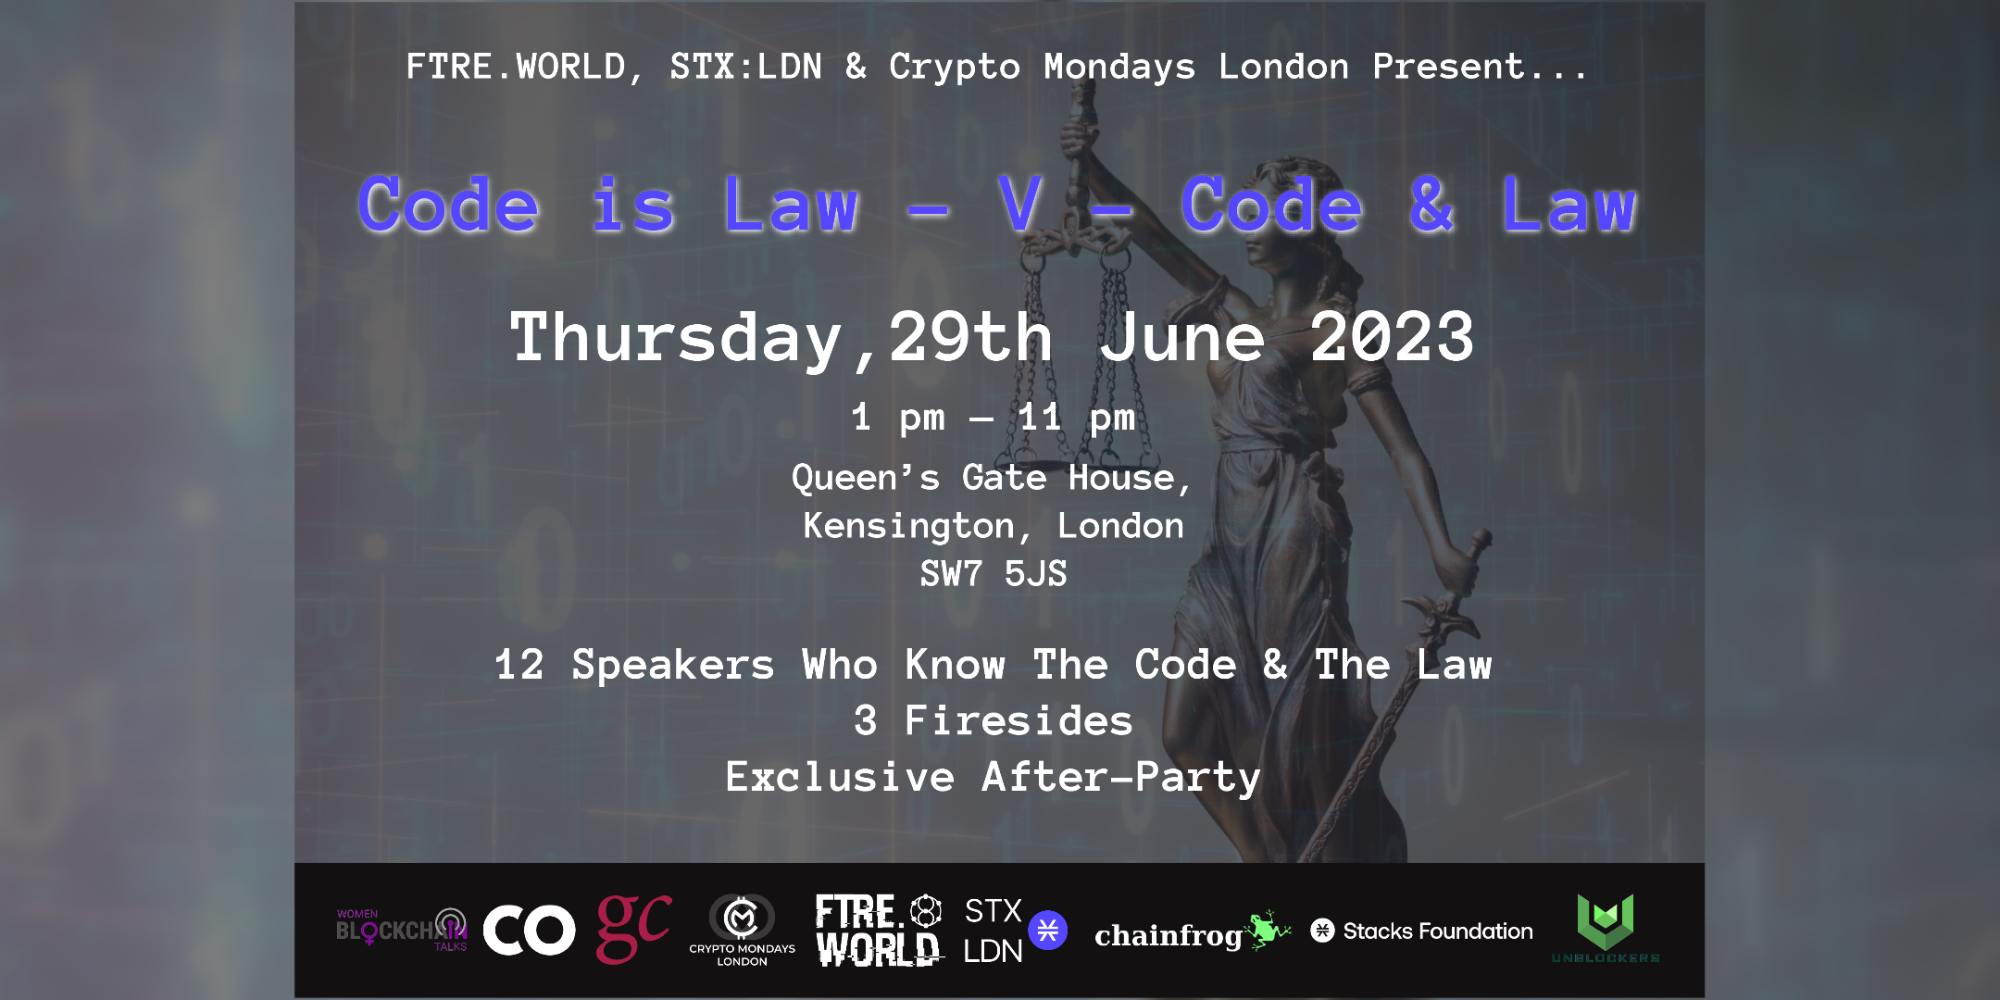 STX:LDN Partners with Crypto Mondays London for Code is Law v Code & Law Conference